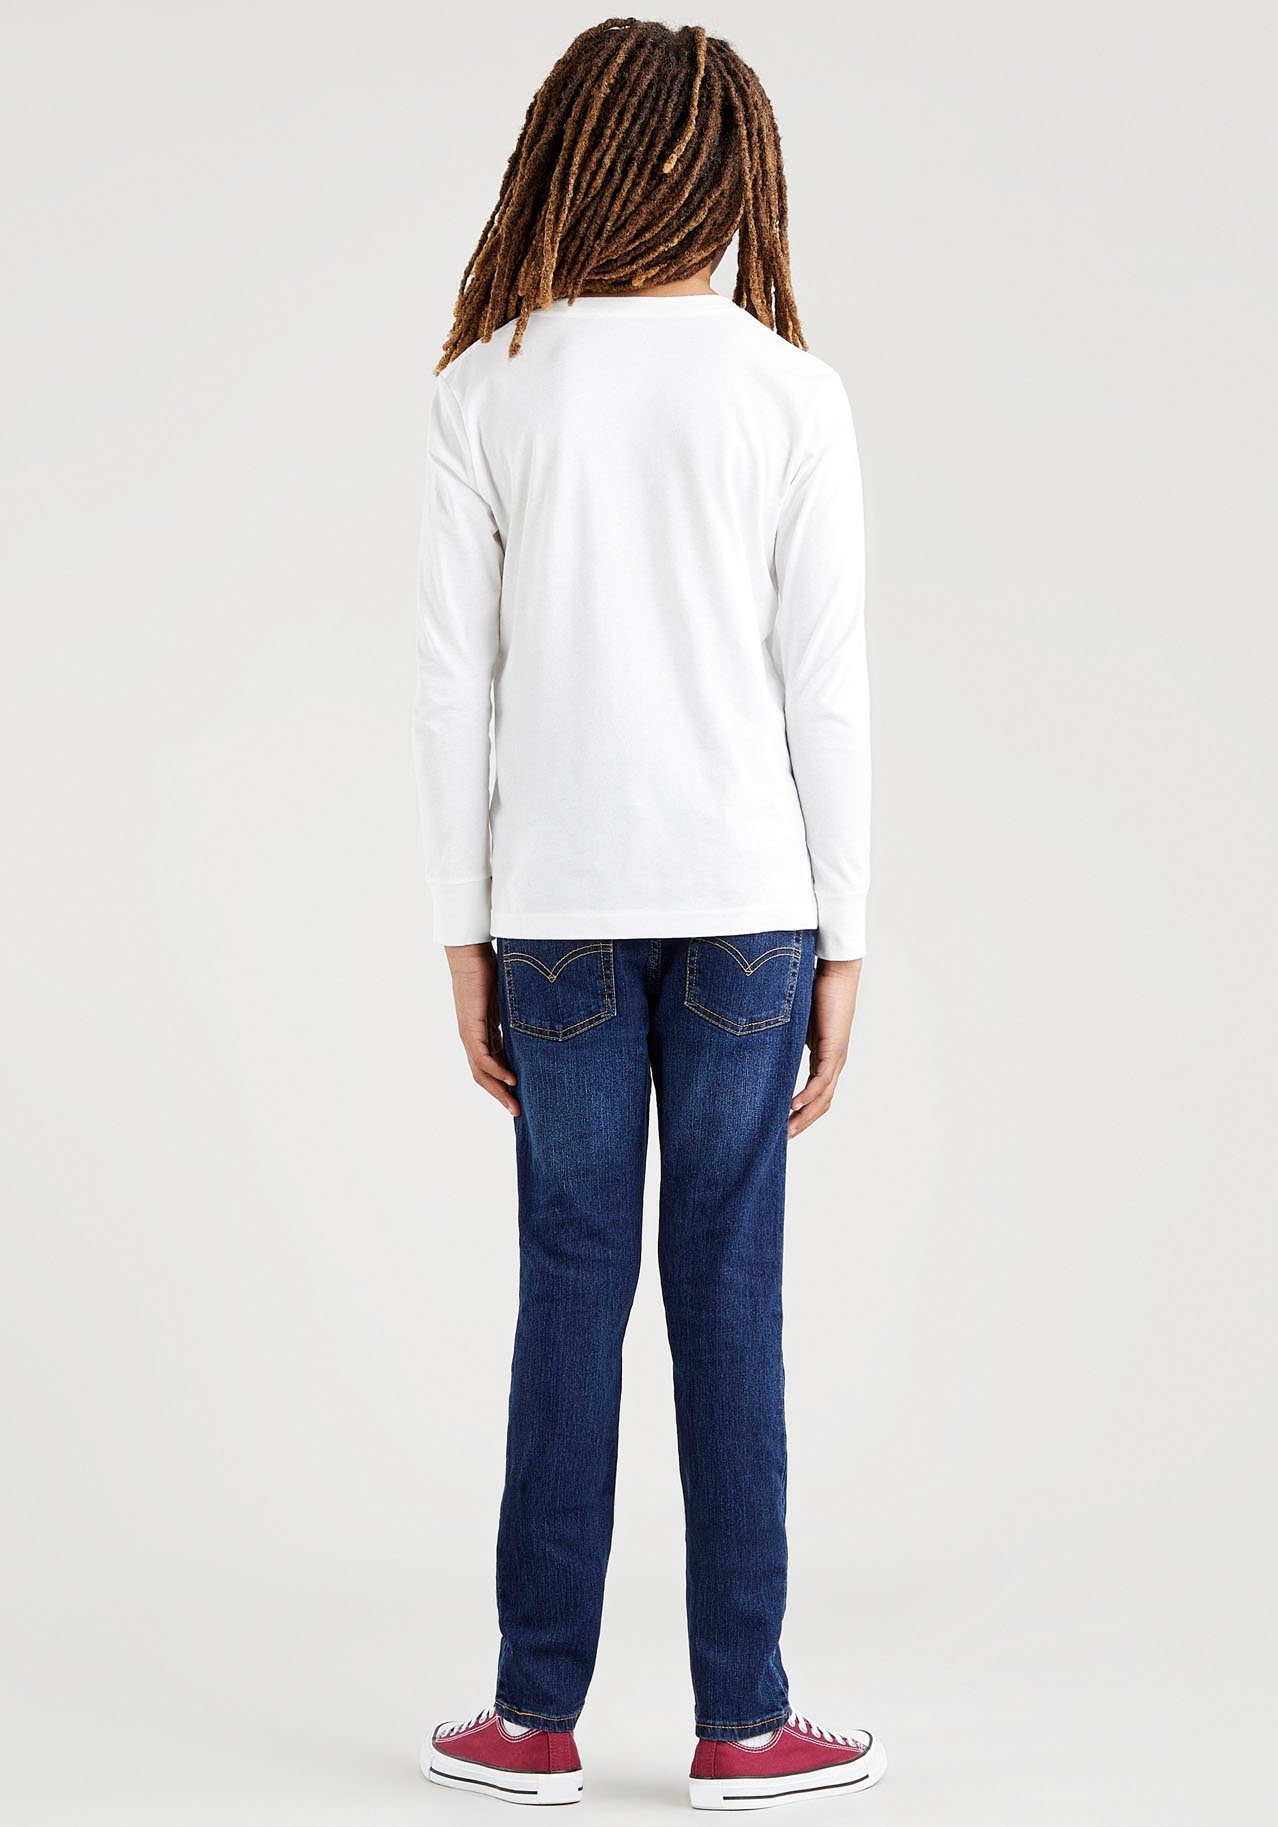 L/S CHESTHIT BATWING Kids TEE Langarmshirt Levi's® for weiß BOYS